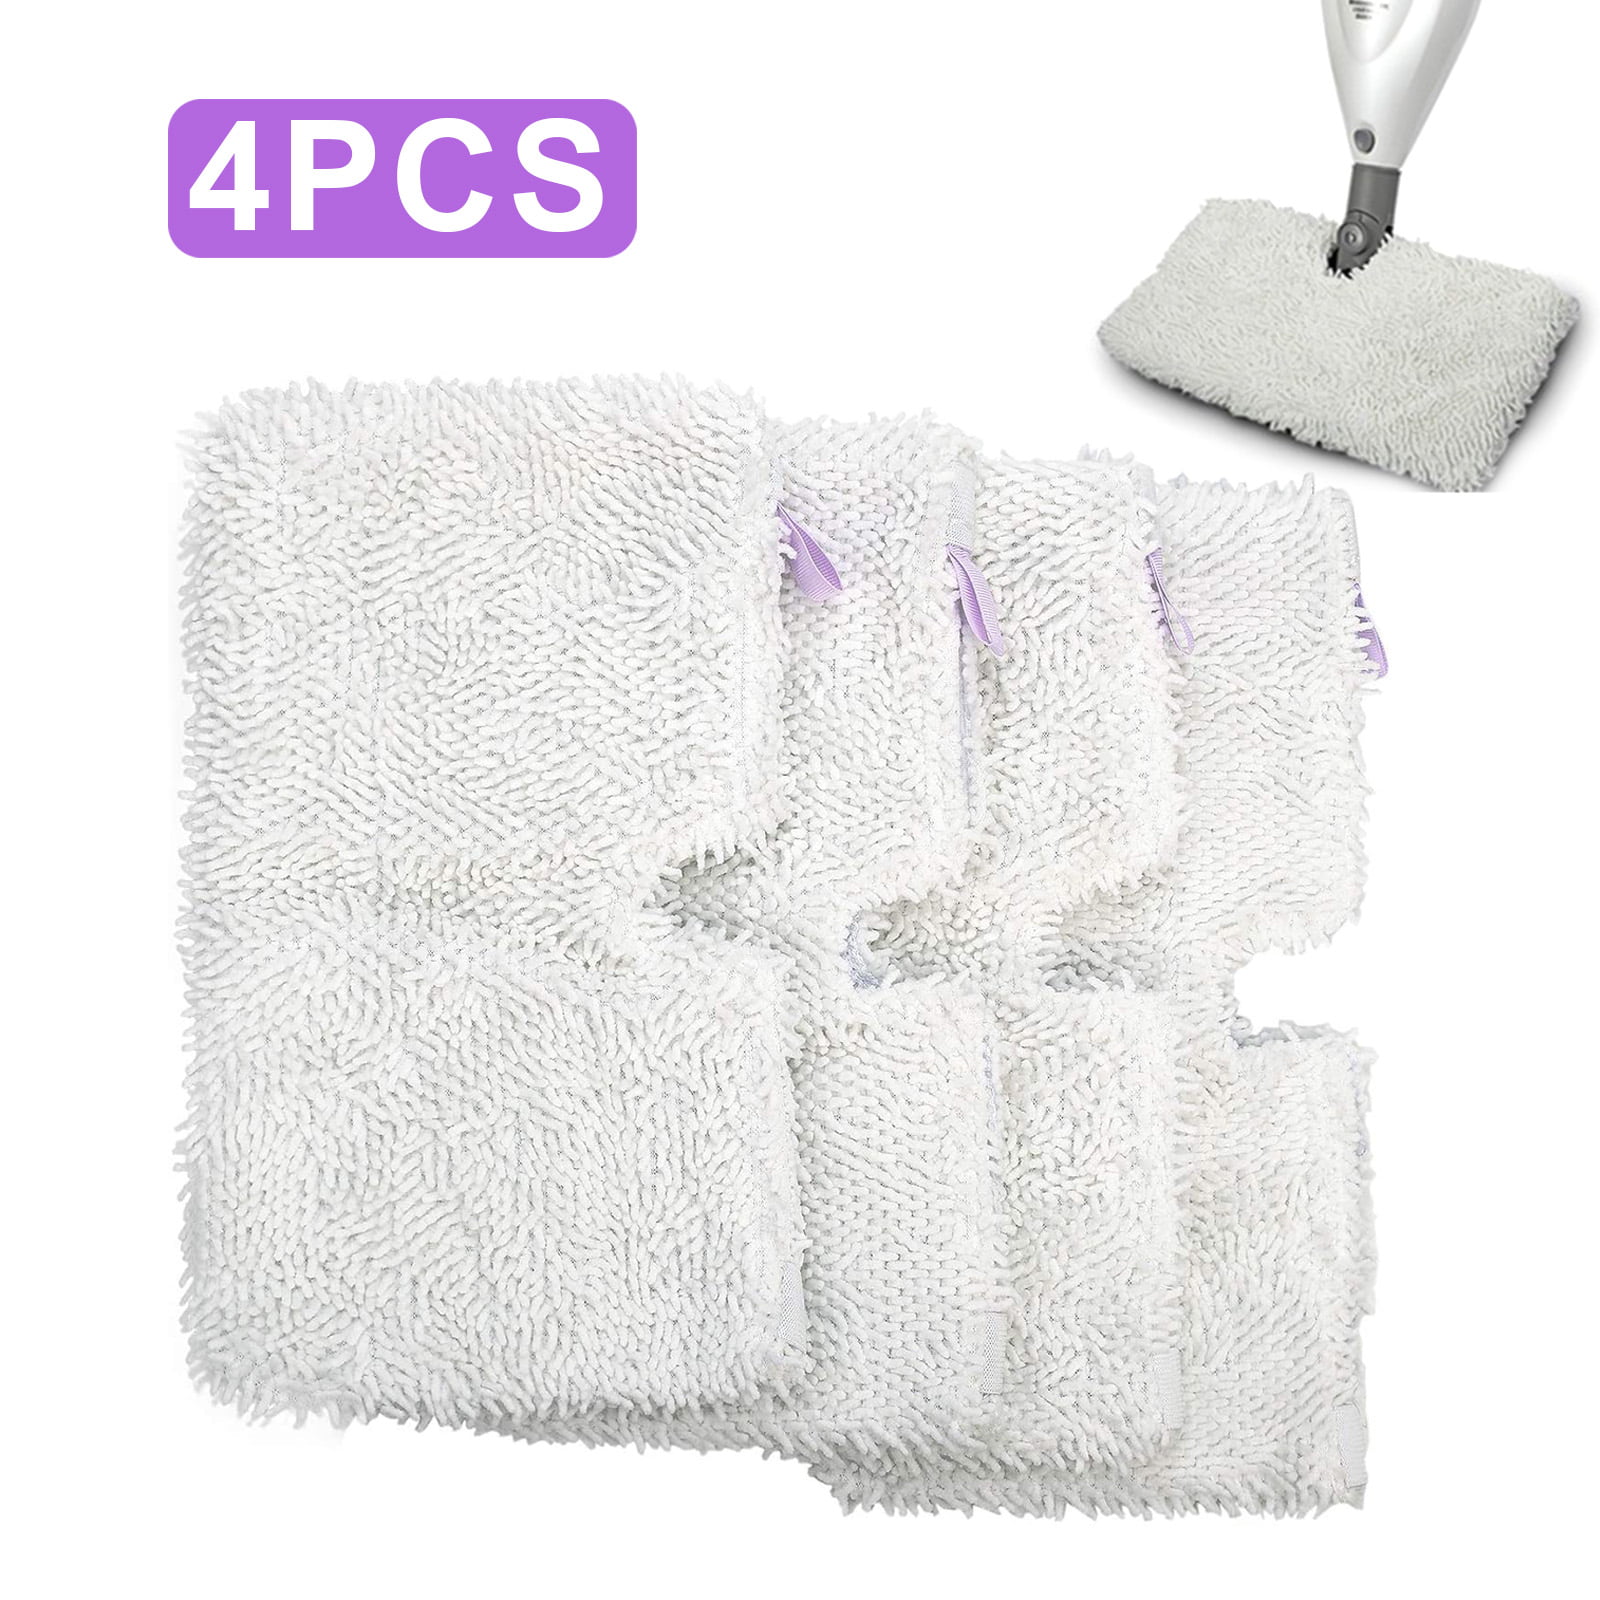 2 Replacement Triangle Pads compatible with Shark Pocket Steam Mop S3501 2T